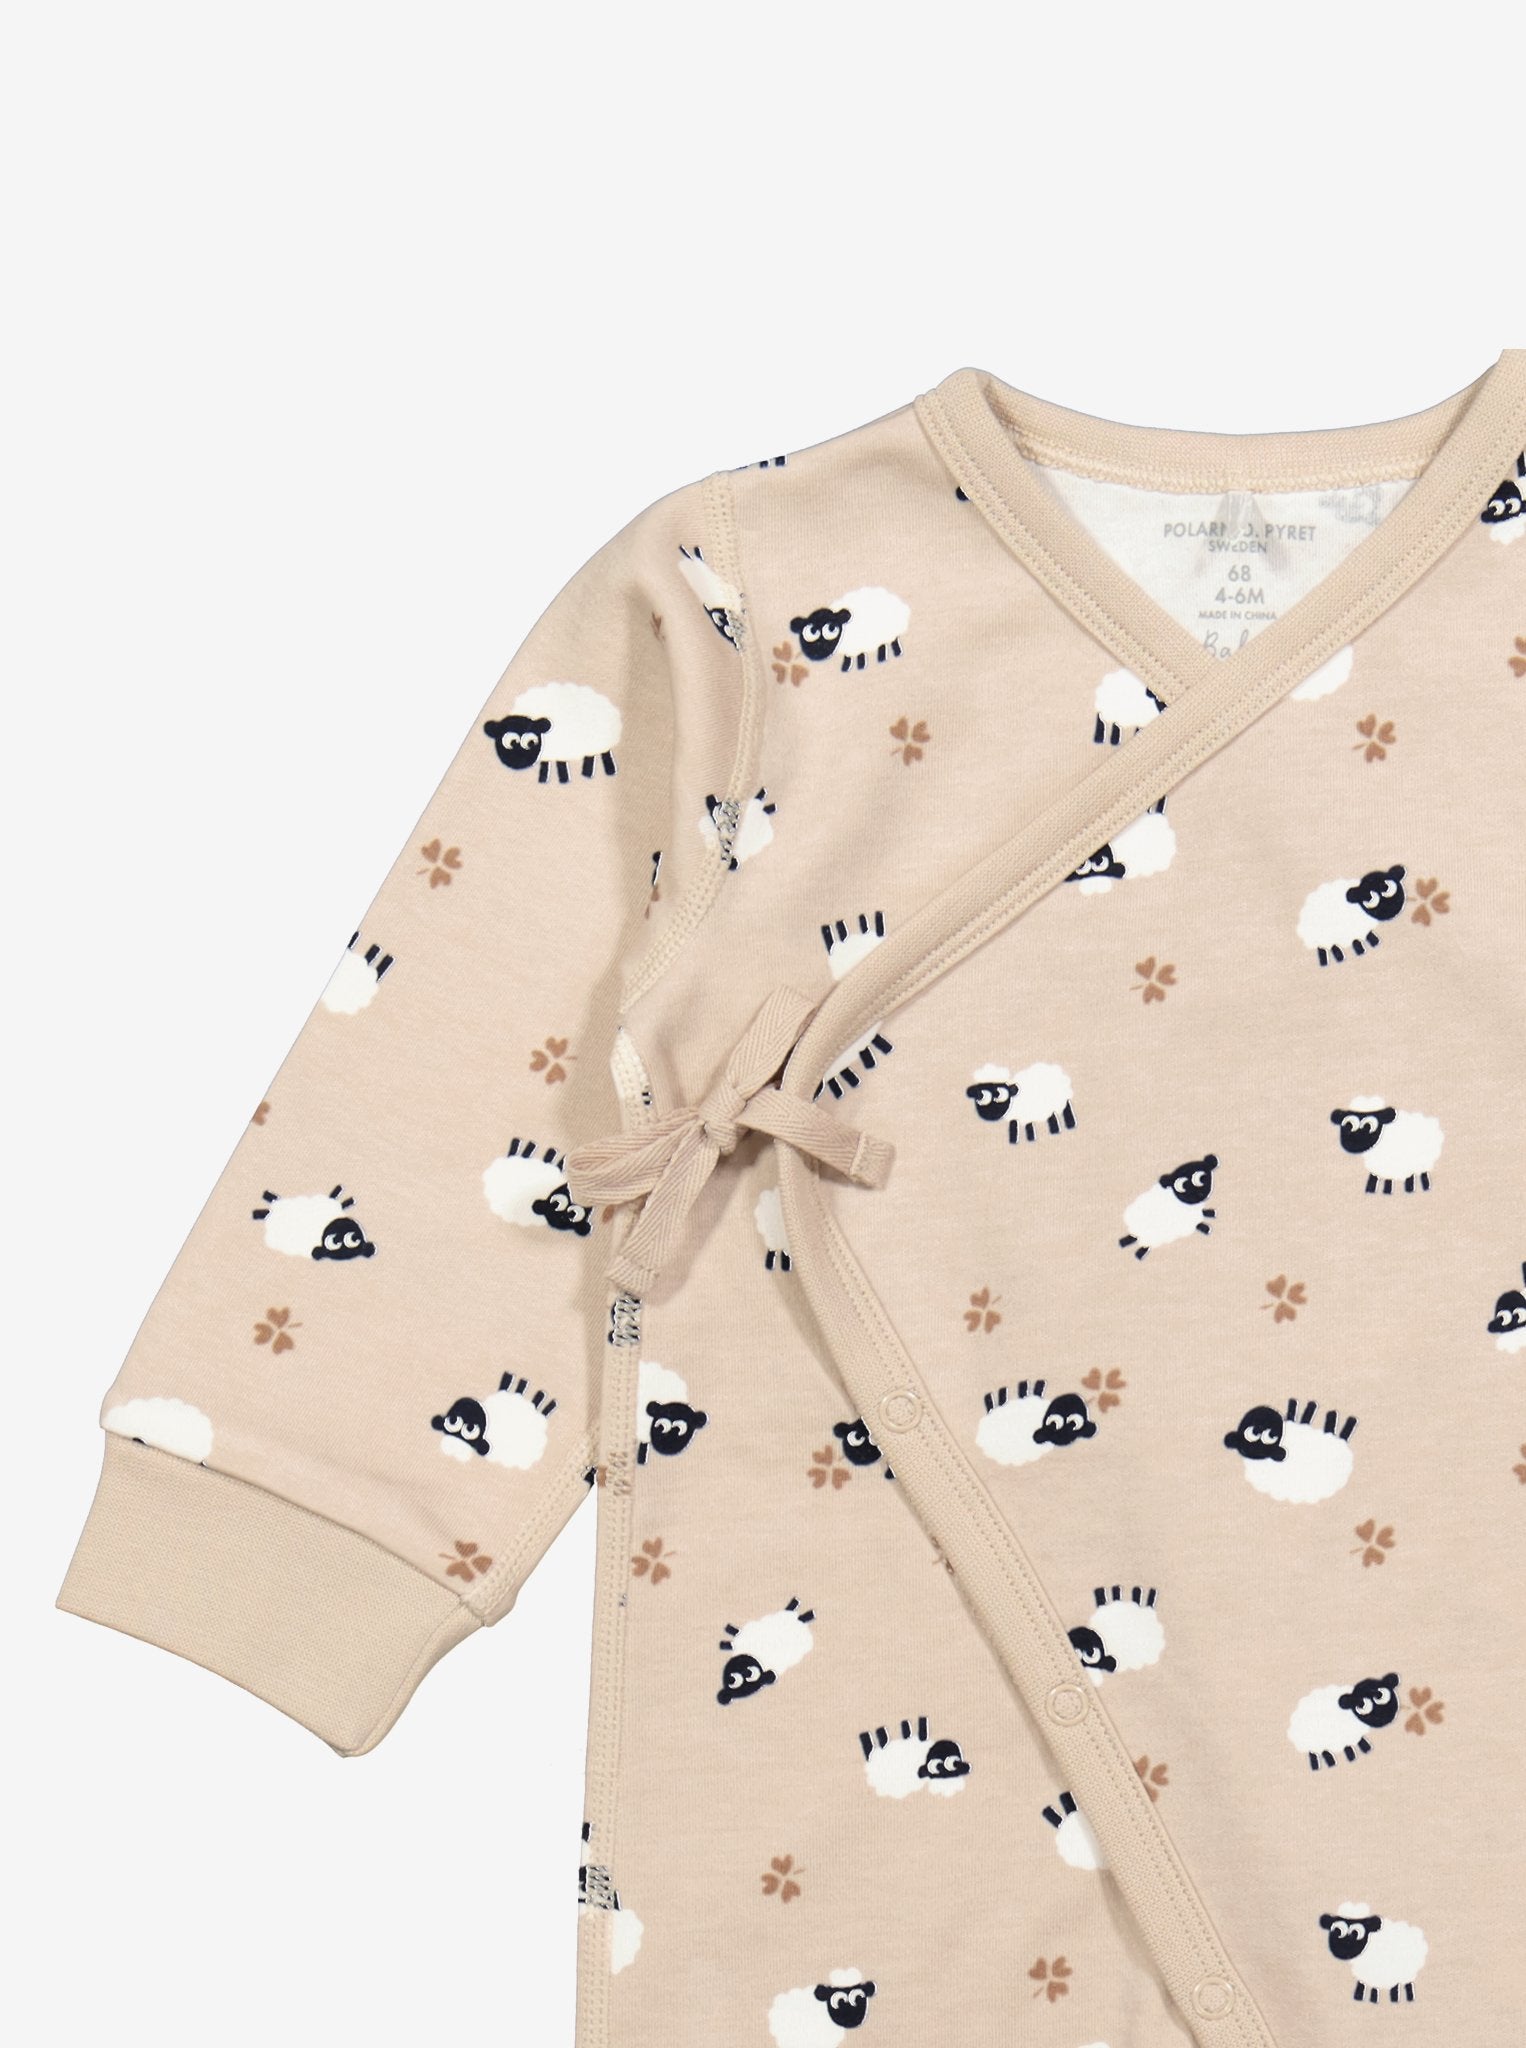  Organic Beige Sheep Baby Romper from Polarn O. Pyret Kidswear. Made with 100% organic cotton.